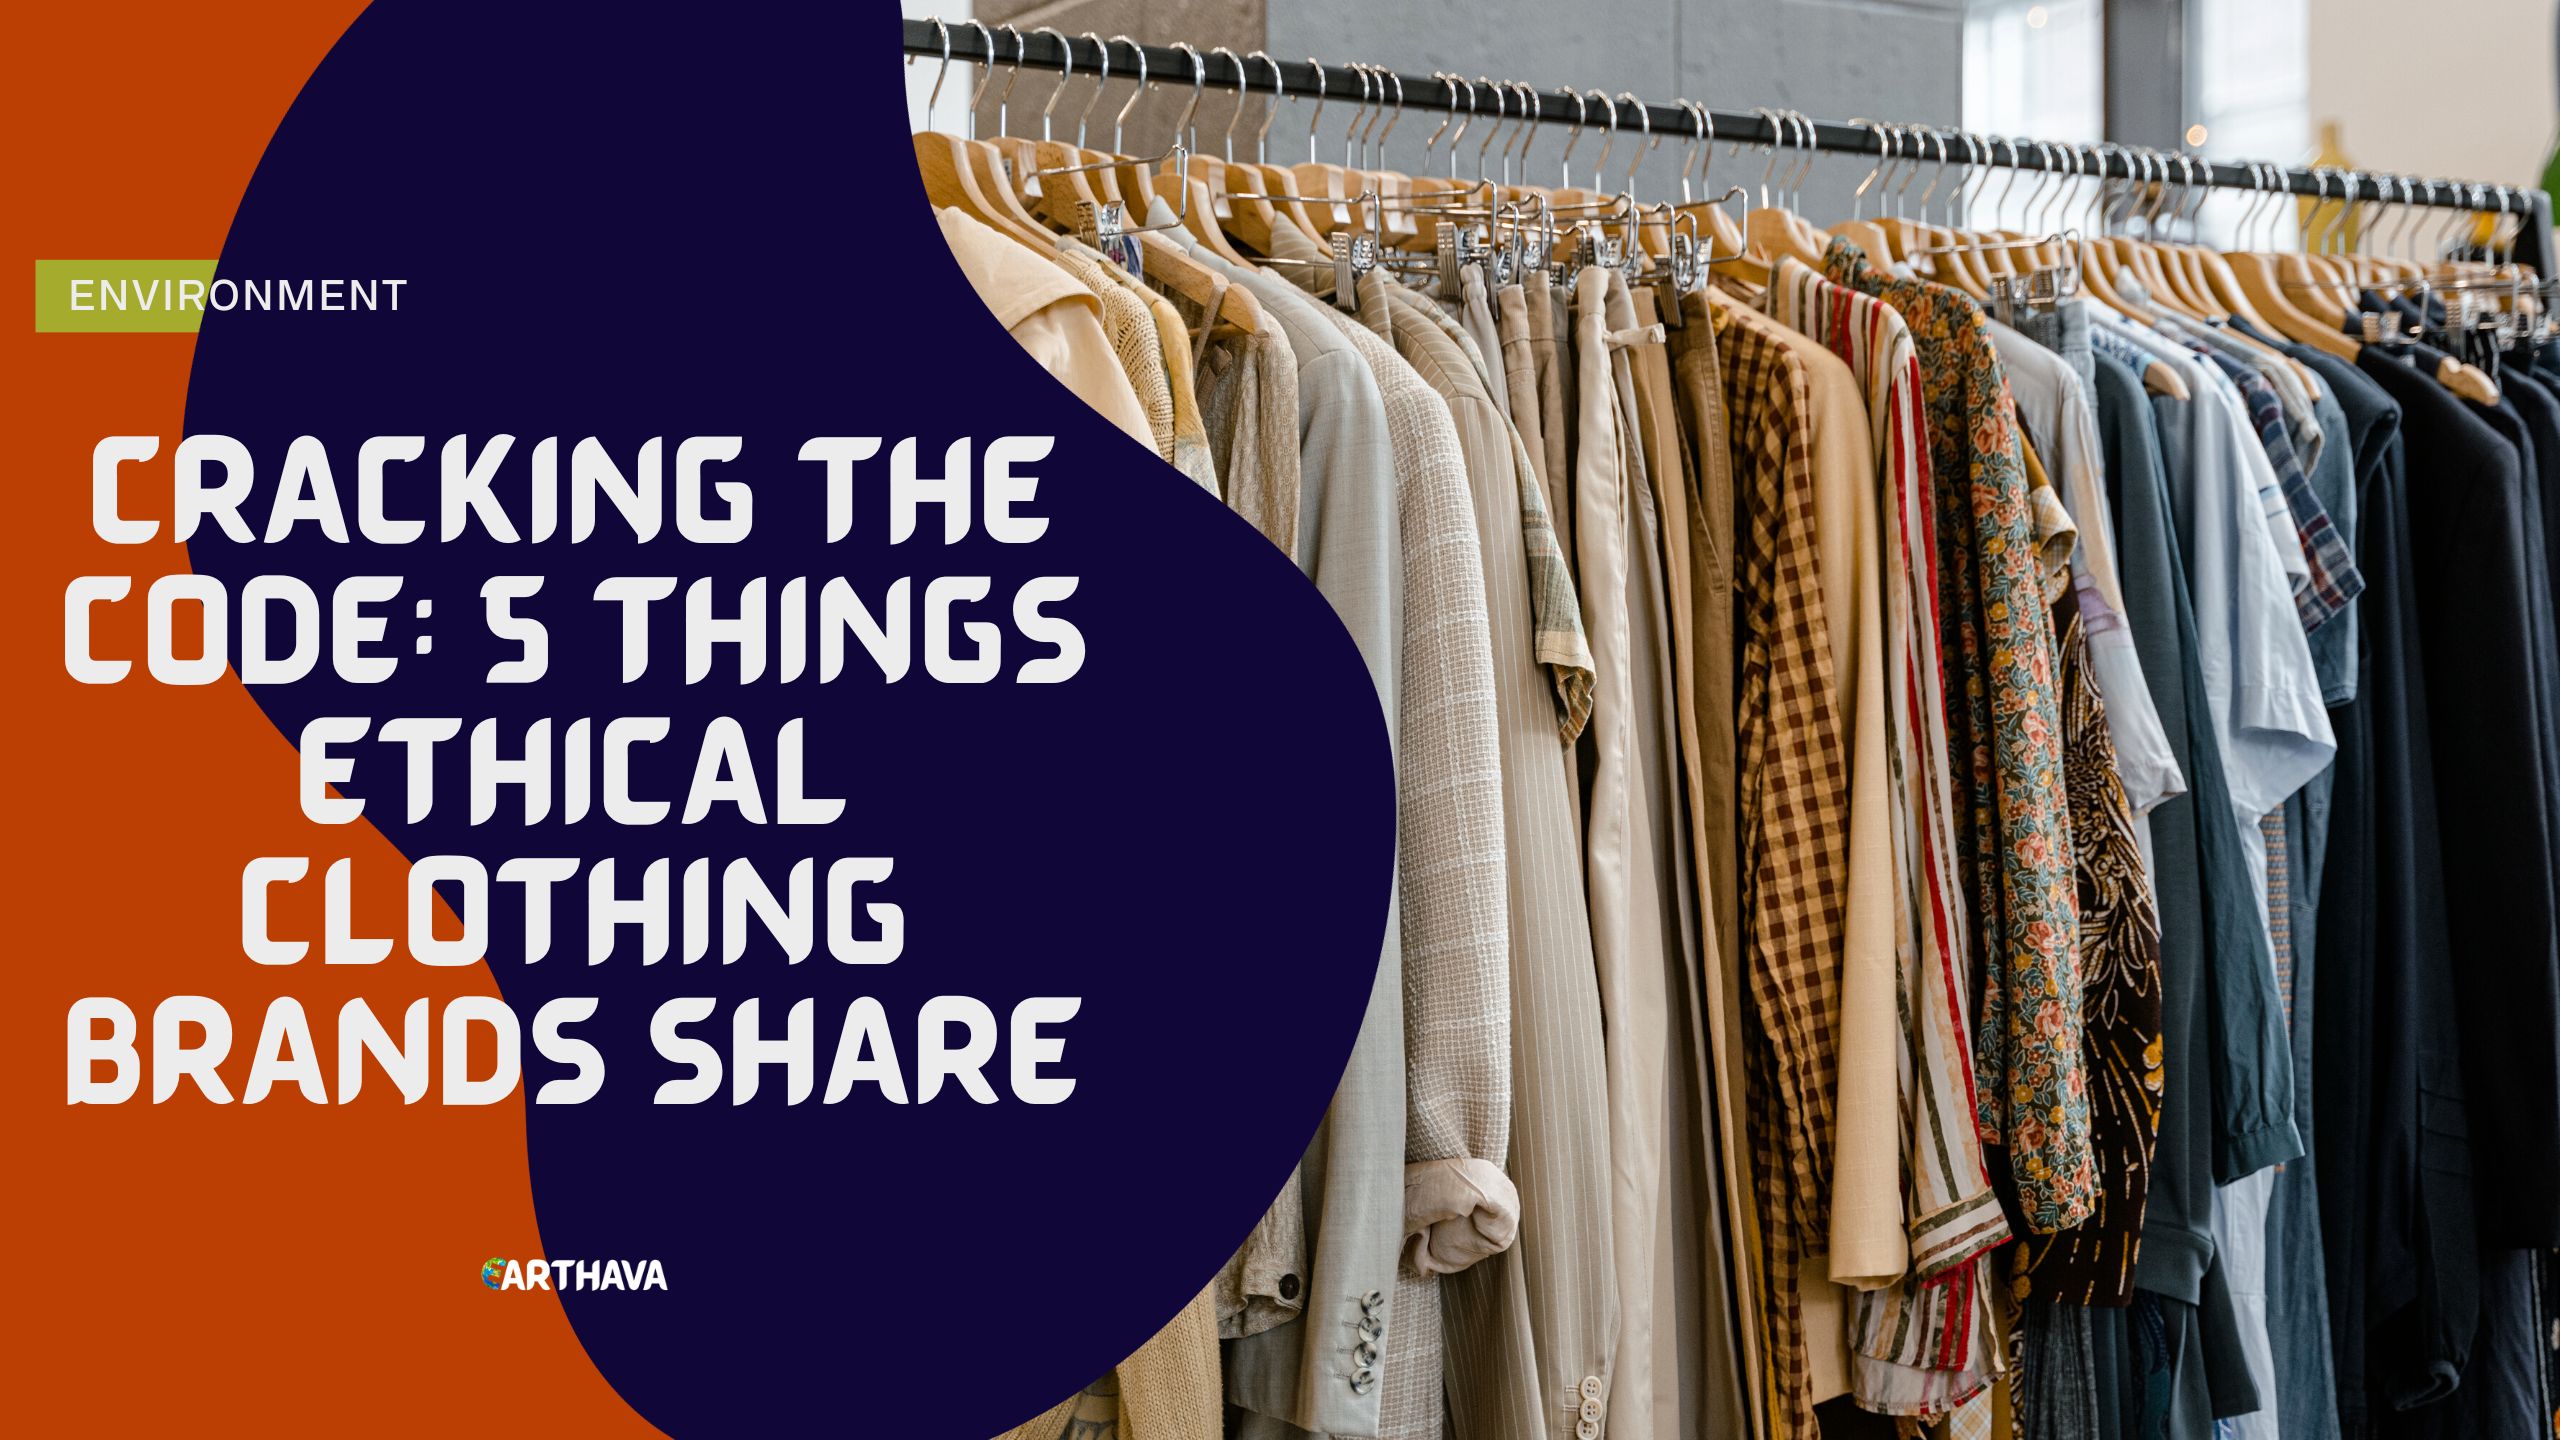 Cracking the Code: 5 Things Ethical Clothing Brands Share - Earthava